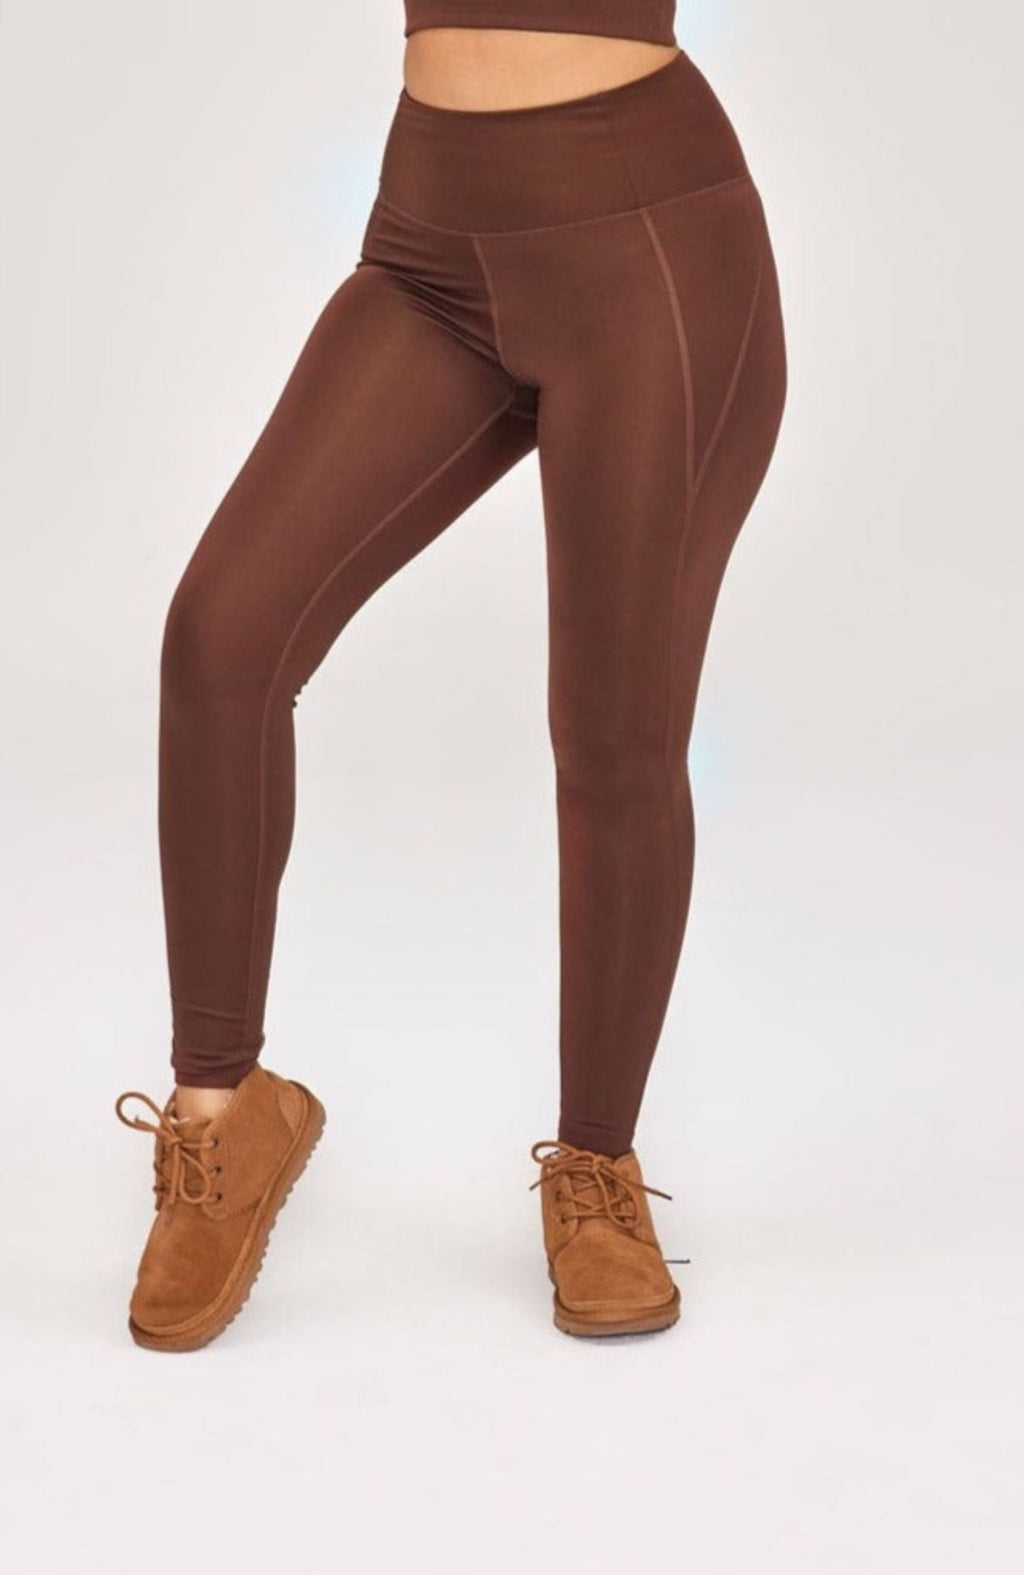 Cuffed Leggings, Shop The Largest Collection